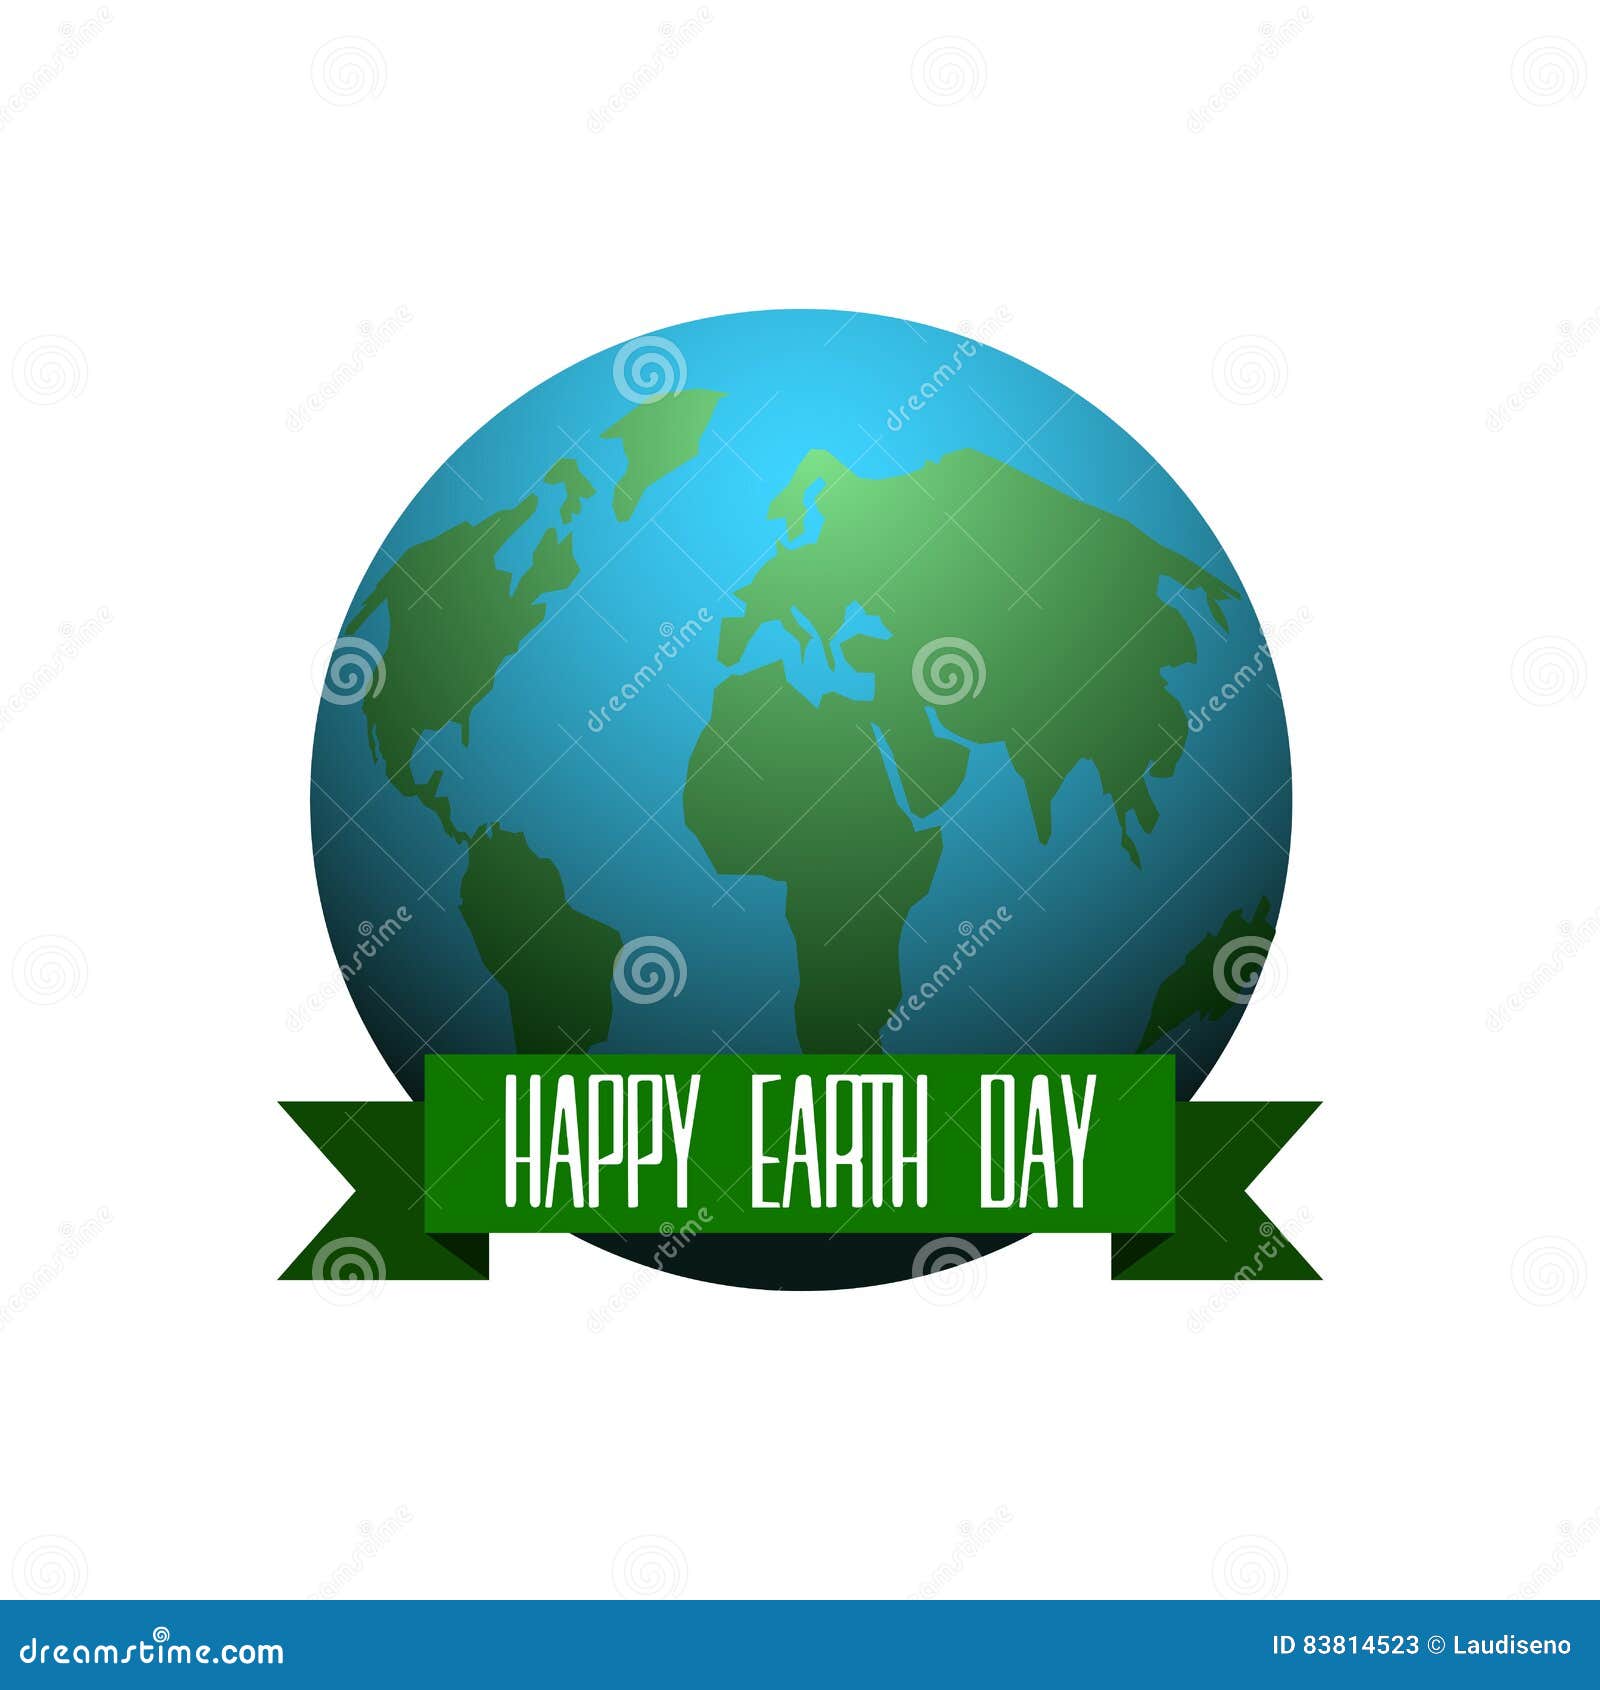 Earth day stock illustration. Illustration of earth, abstract - 83814523